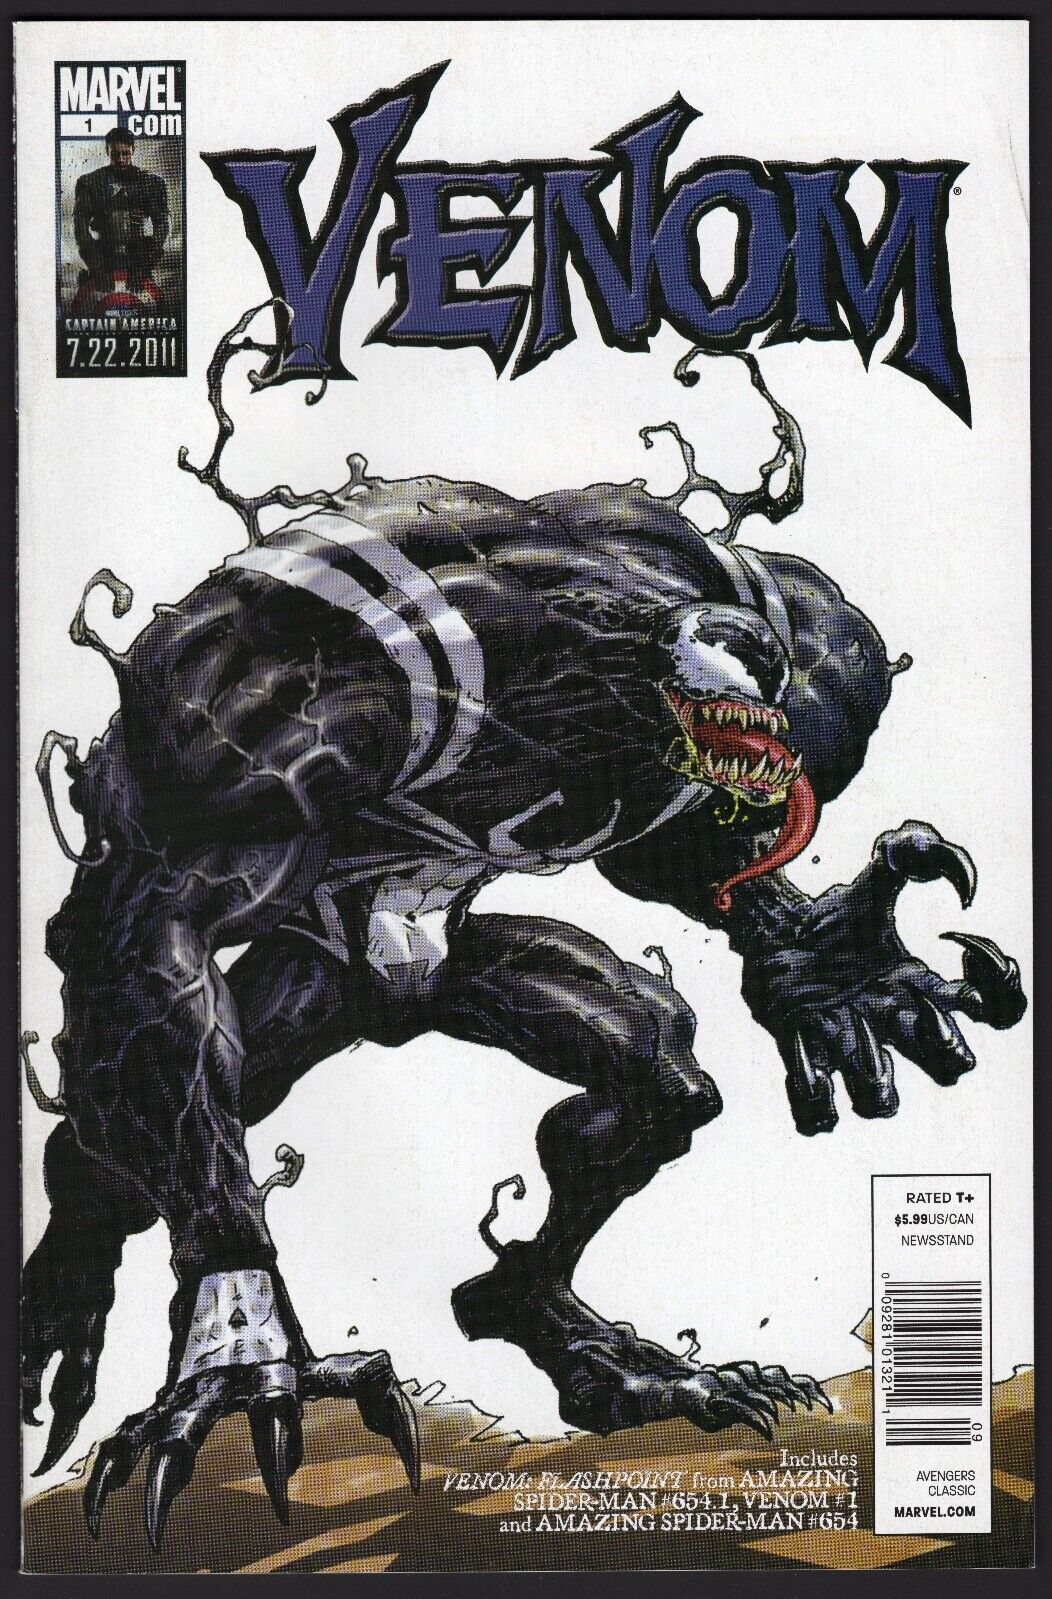 Venom: Flashpoint #1 (2011) Tony Moore Cover - Newsstand